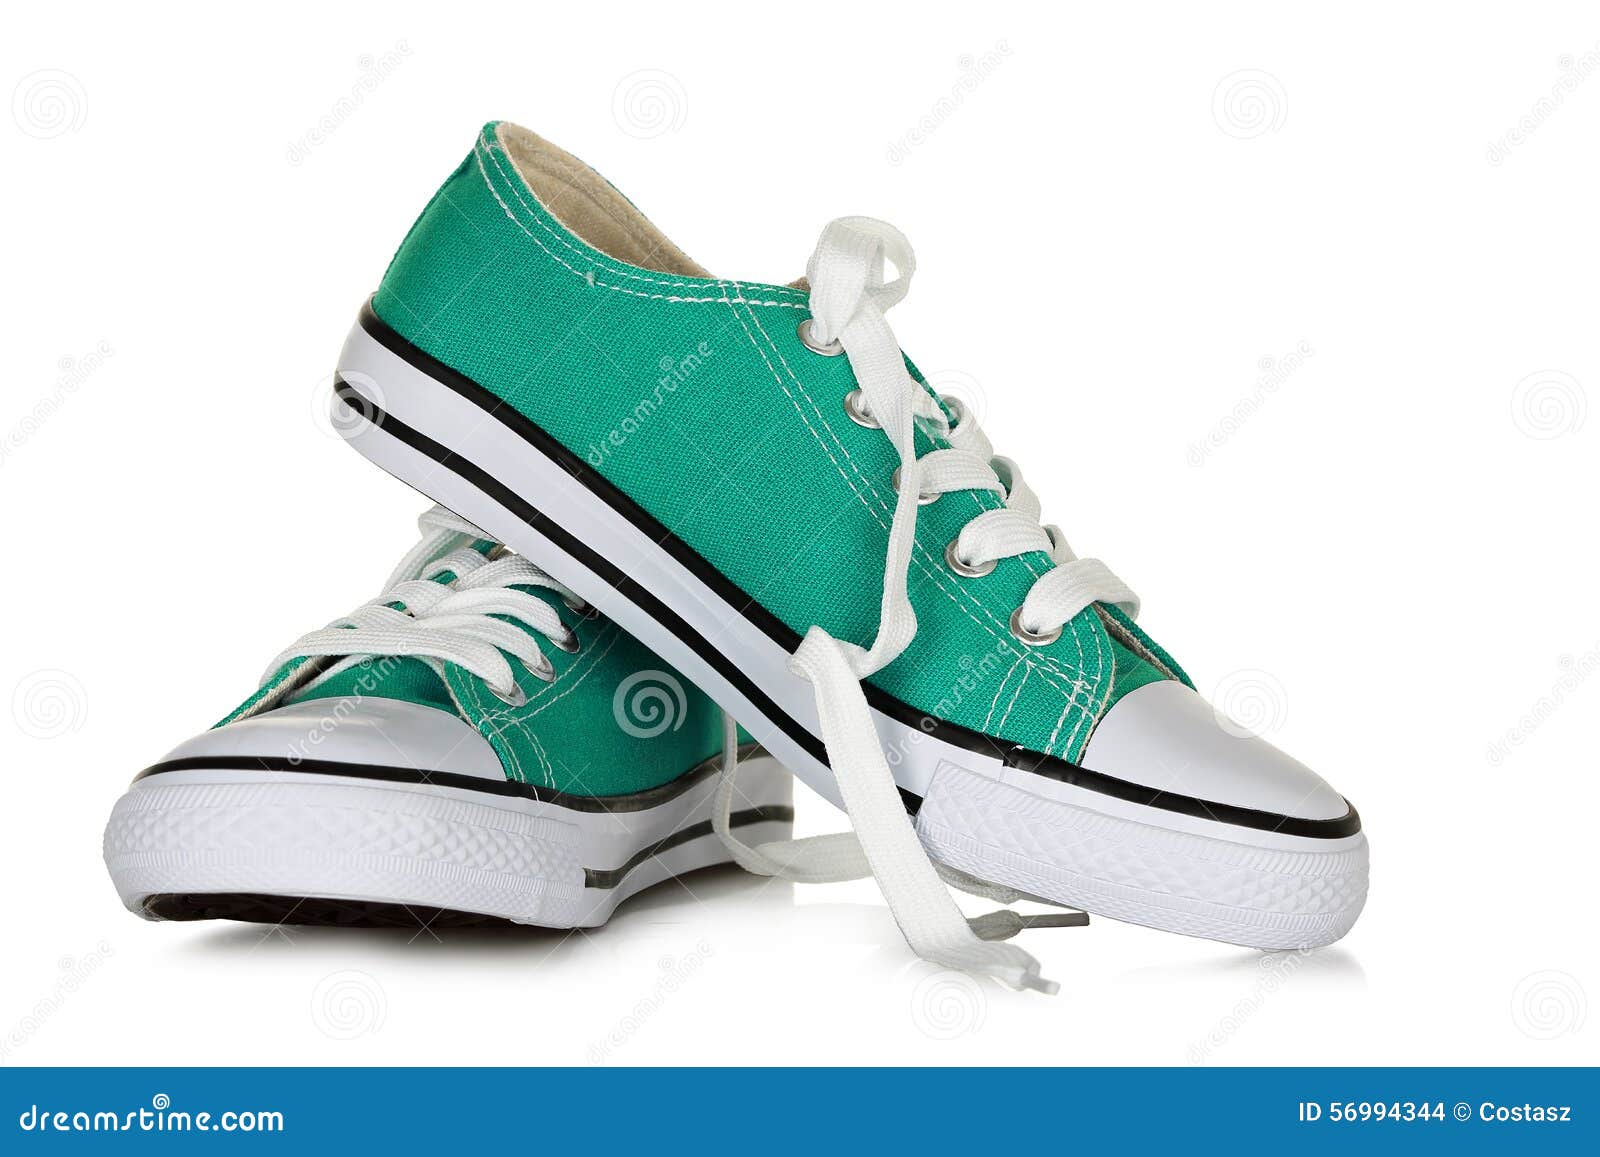 Sneakers stock photo. Image of white, rubber, casual - 56994344